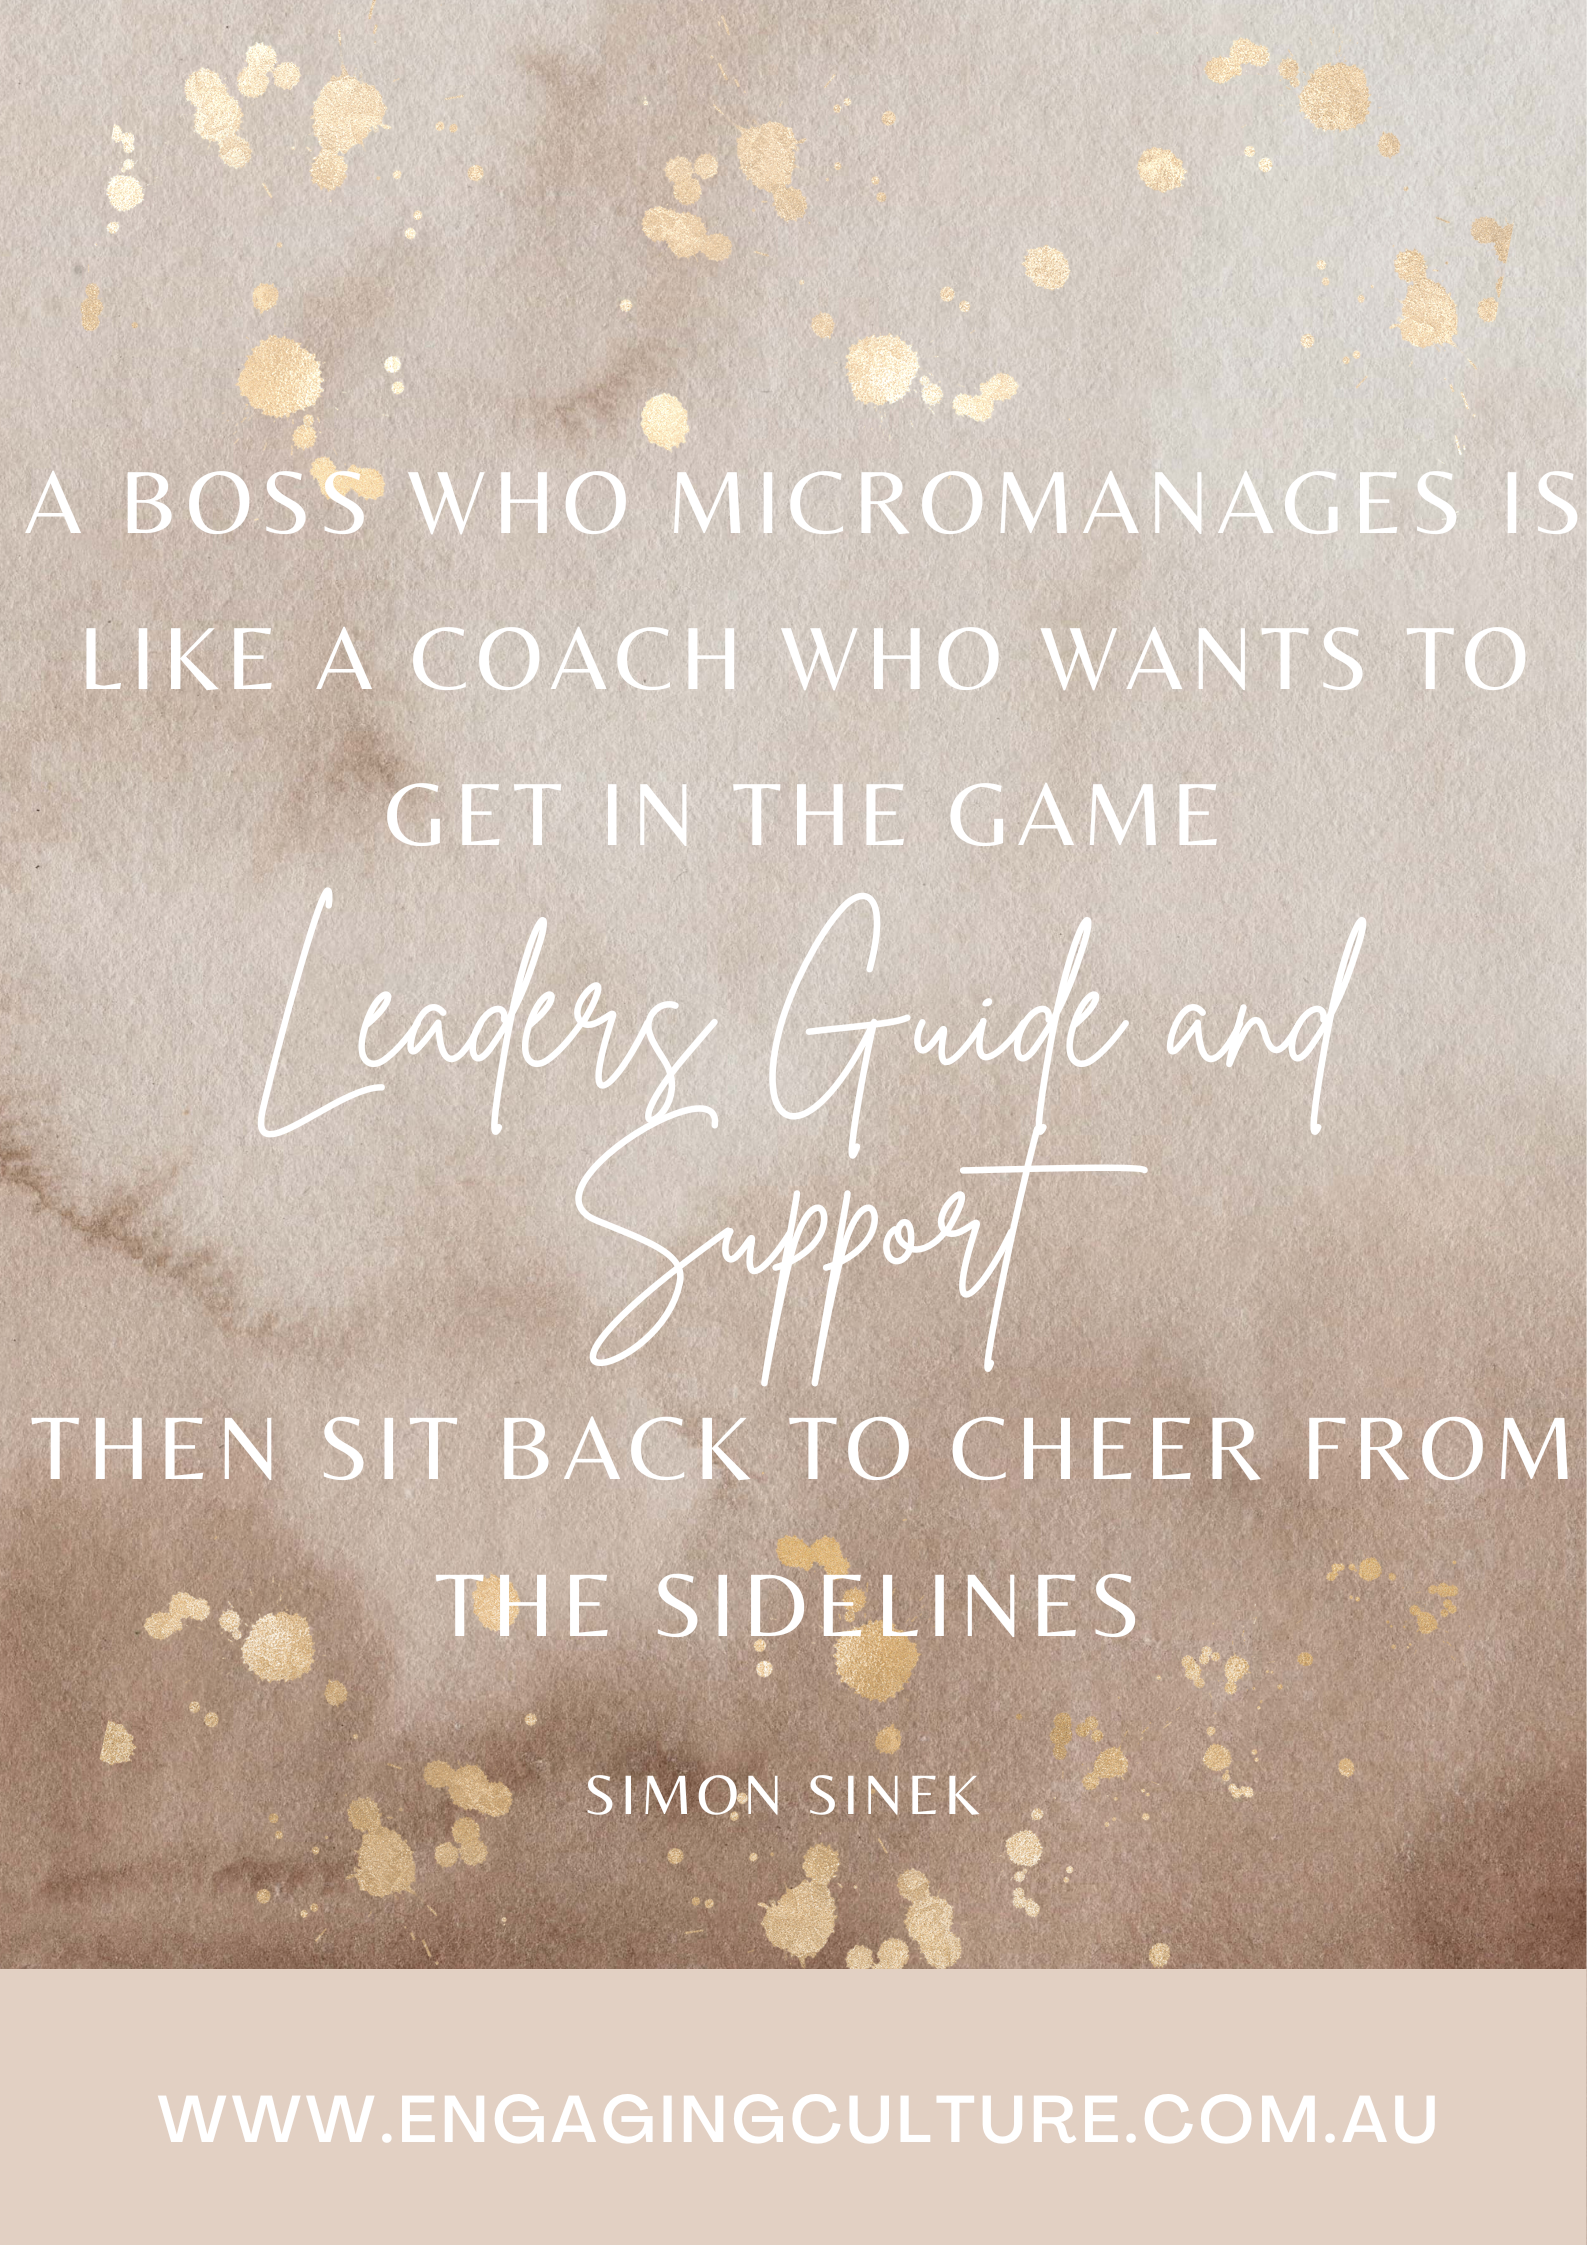 A boss who micromanages is like a coach who wants to get in the game. Leaders coach and support then sit back to cheer from the sidelines - Simon Sinek